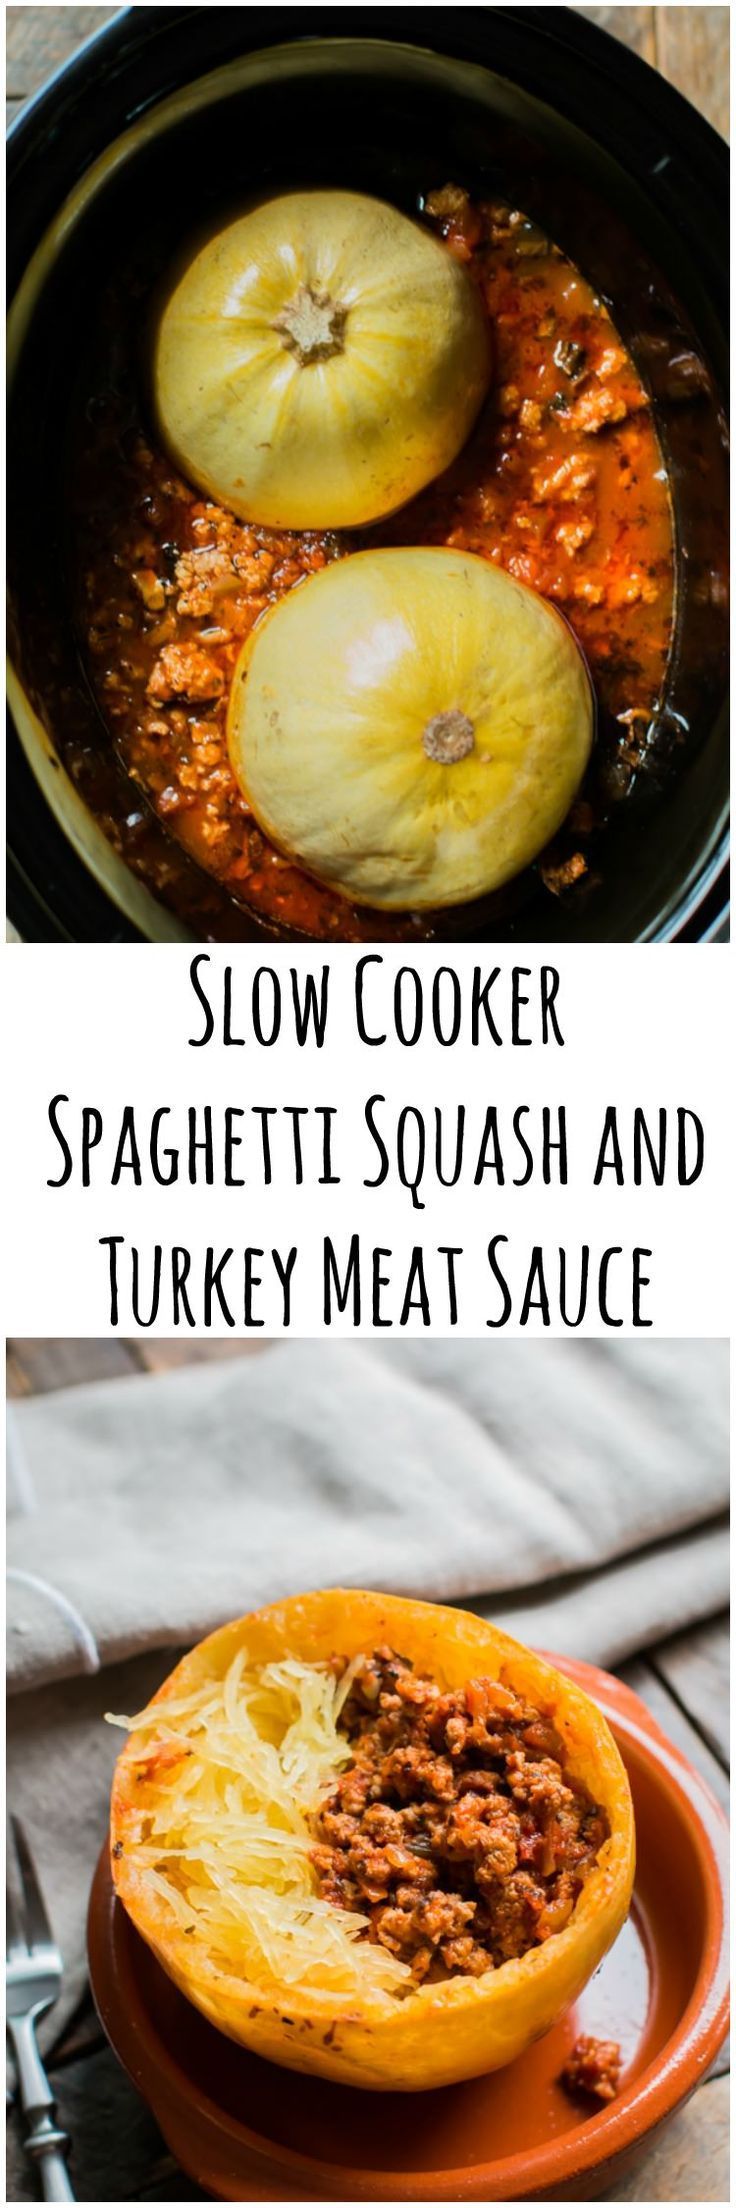 Slow Cooker Spaghetti Squash and Turkey Meat Sauce – The Magical Slow Cooker